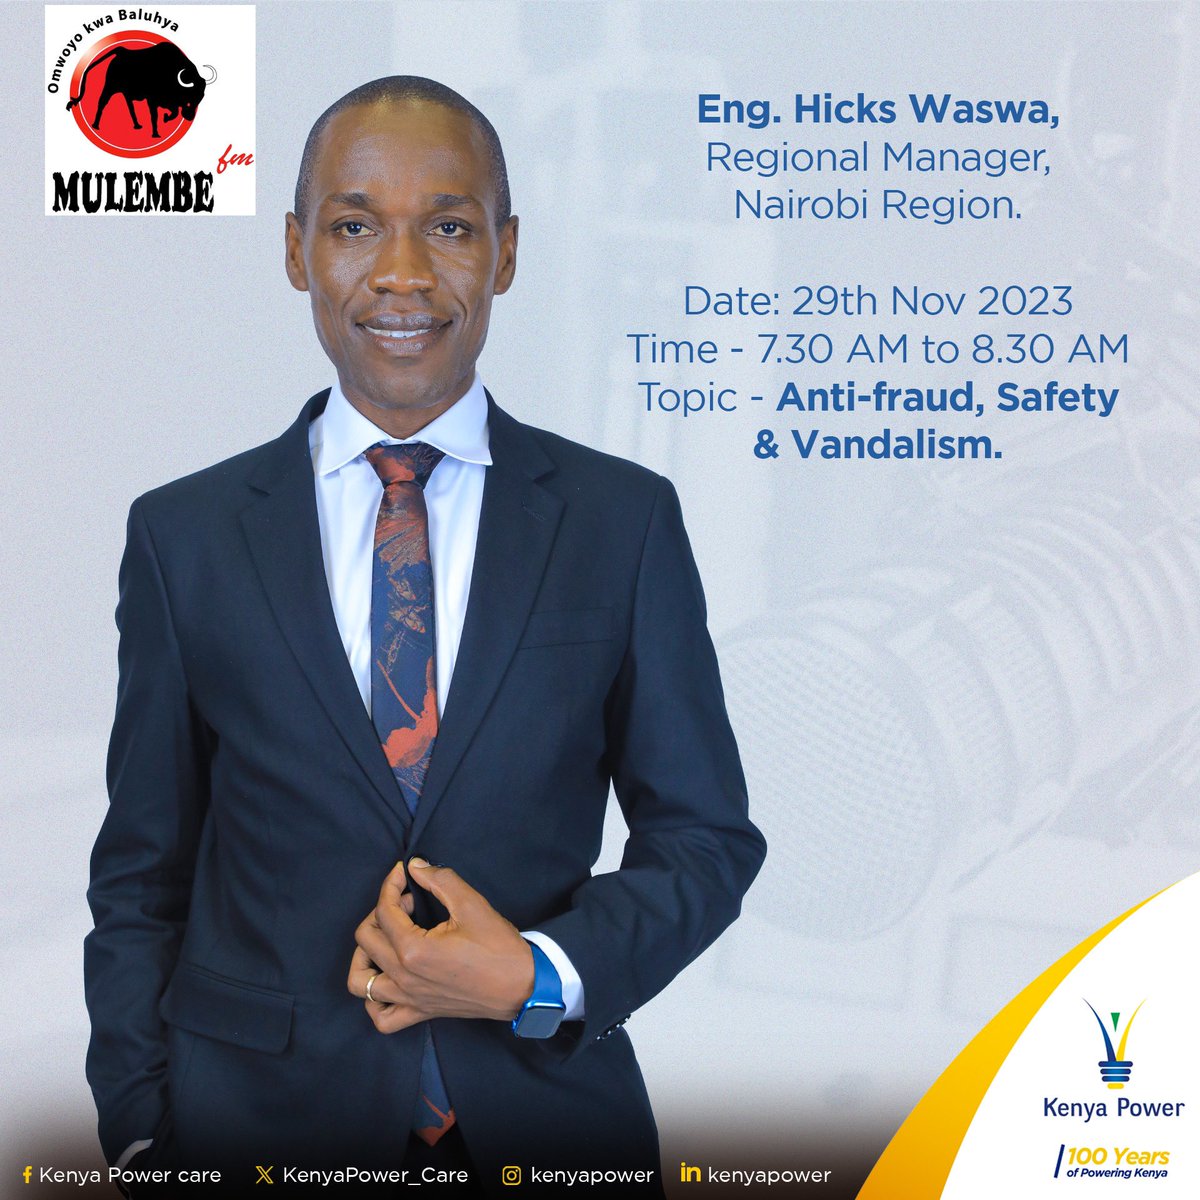 Tune in to @Mulembe_FM’s Bhukha Bushiere from 7:30 AM, as Eng. Hicks Waswa, Regional Manager Nairobi Region, leads a crucial discussion on combating theft, fraud, vandalism, and ensuring public safety. #KaaRada #EpukaNoma ^JC